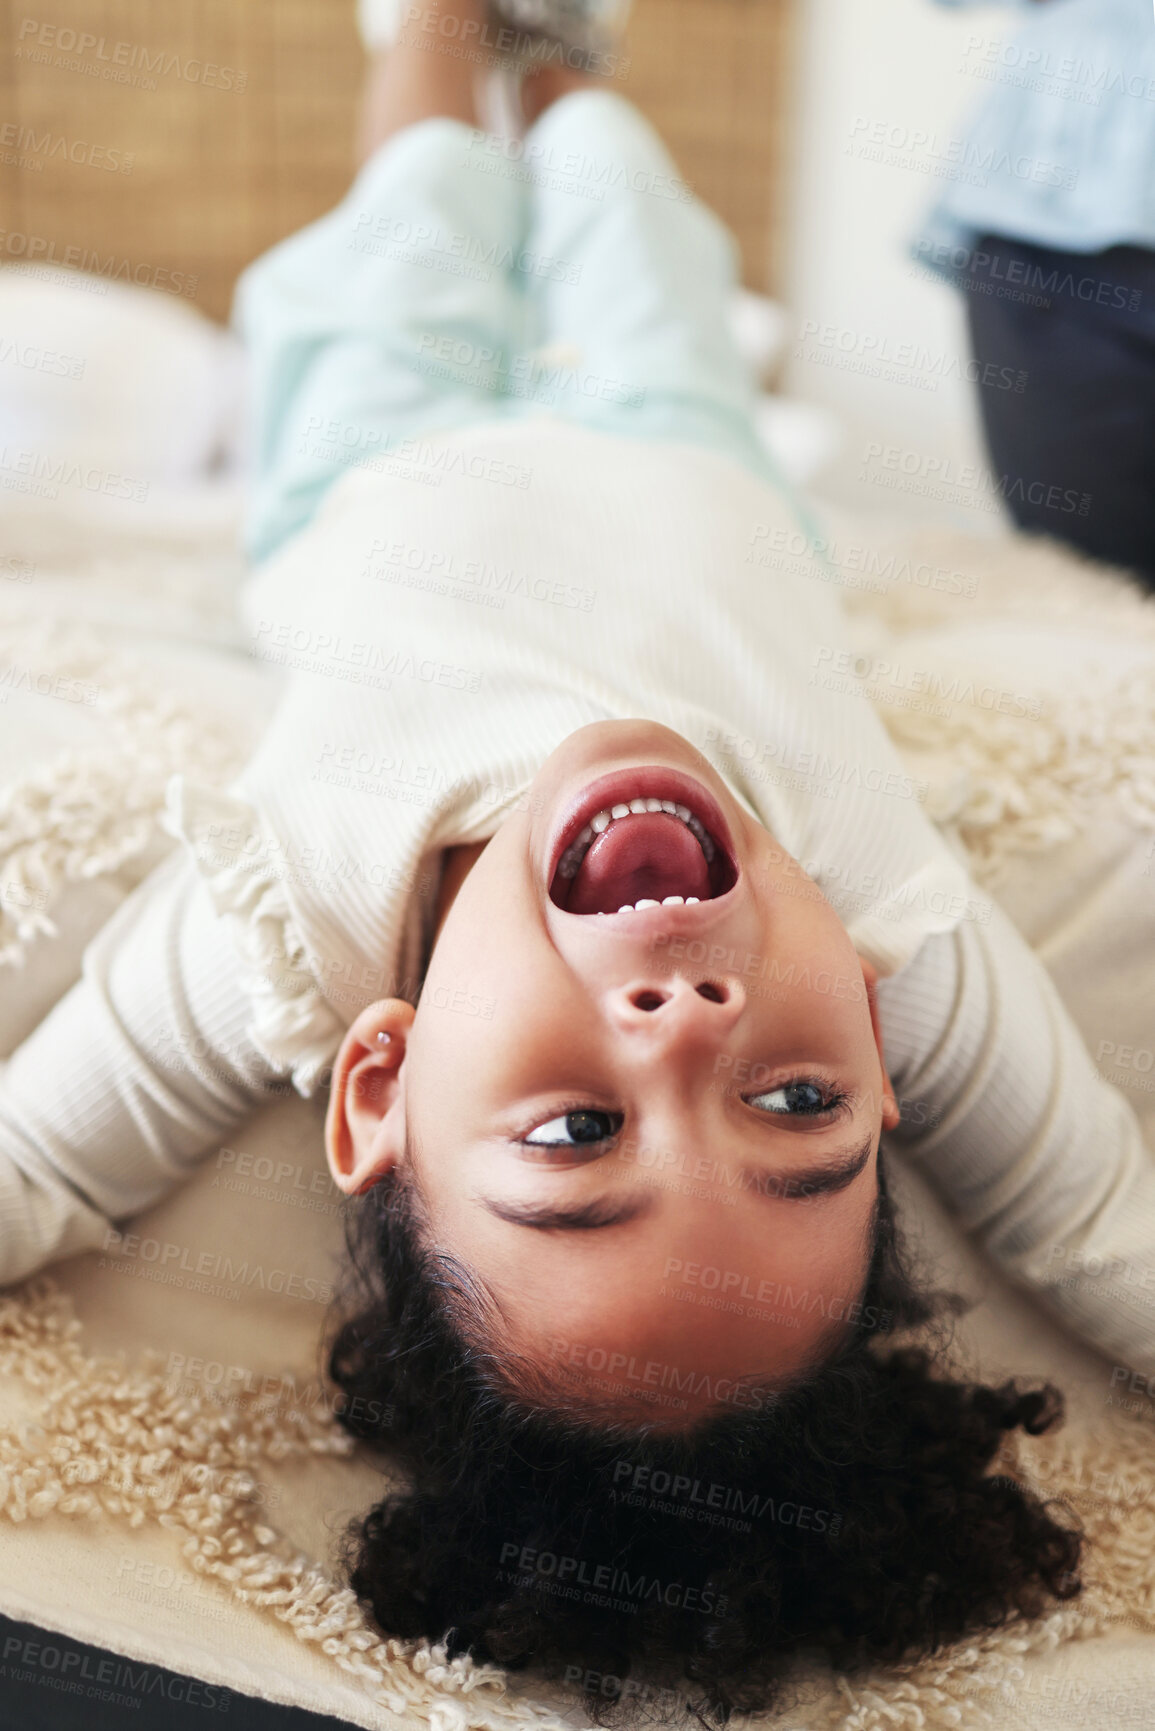 Buy stock photo Children, fun and bed with a black girl playing upside down in a bedroom of her home looking excited. Kids, happy and playful with a young female child shouting or screaming while lying in a house